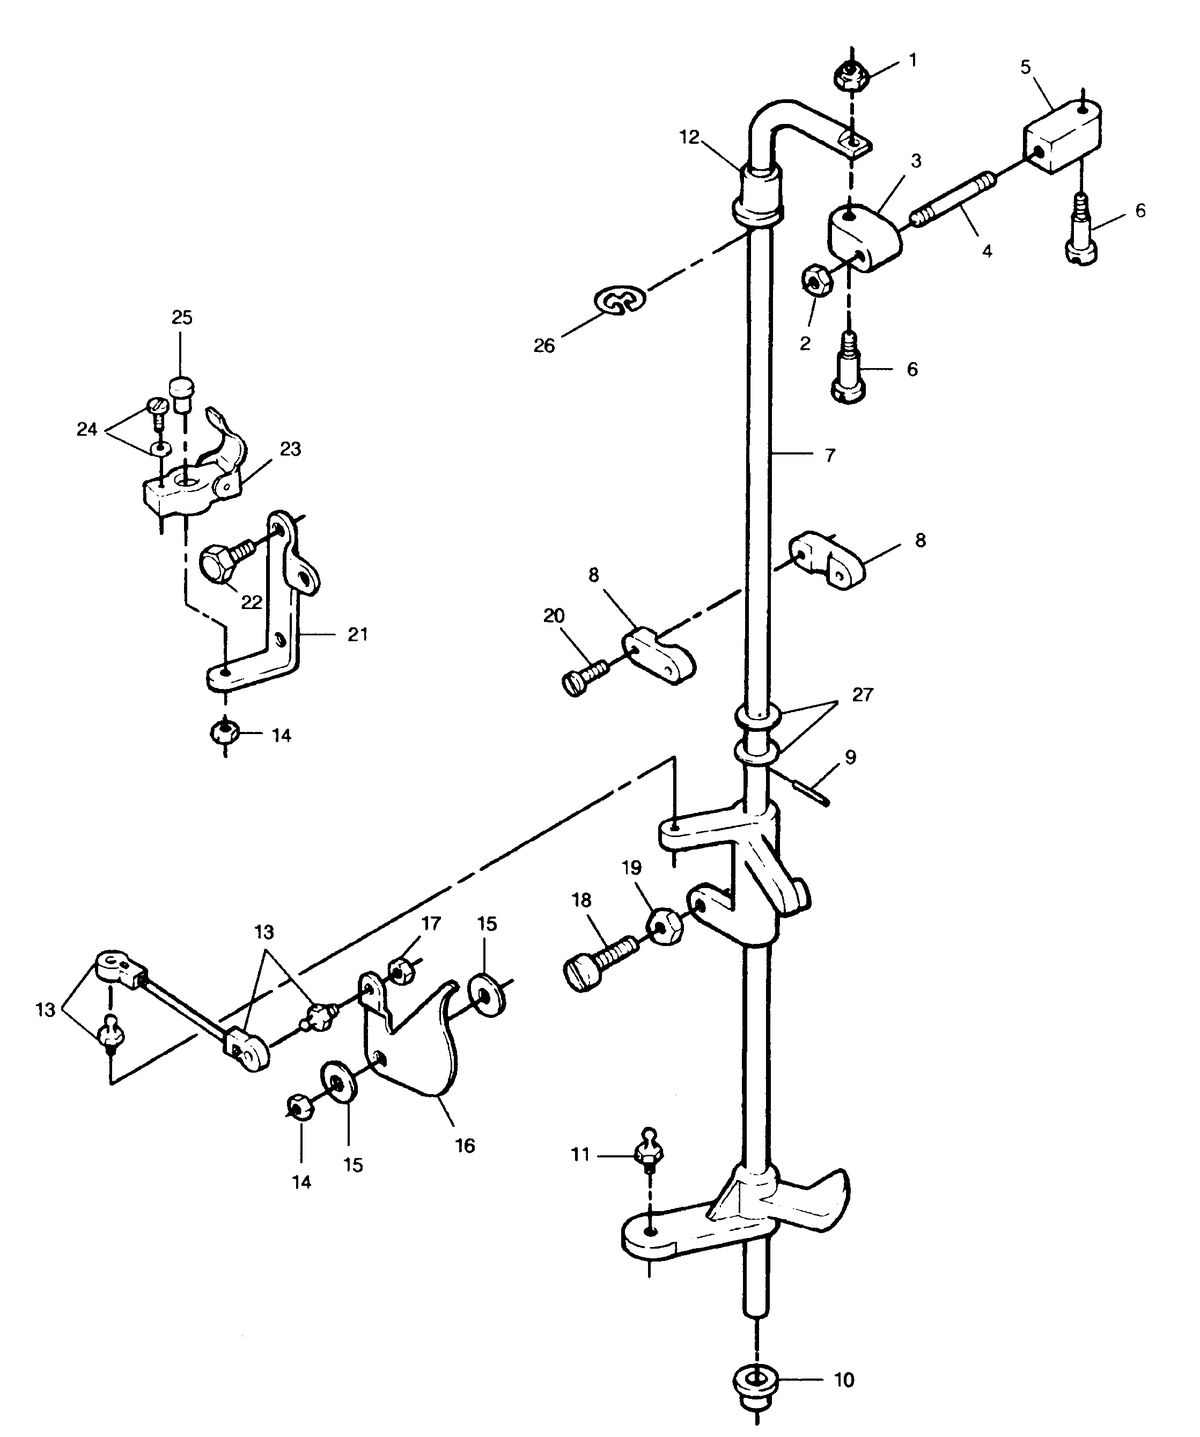 FORCE FORCE 120 H.P. "L" - DRIVE "B" MODELS TOWERSHAFT AND THROTTLE LINKAGE